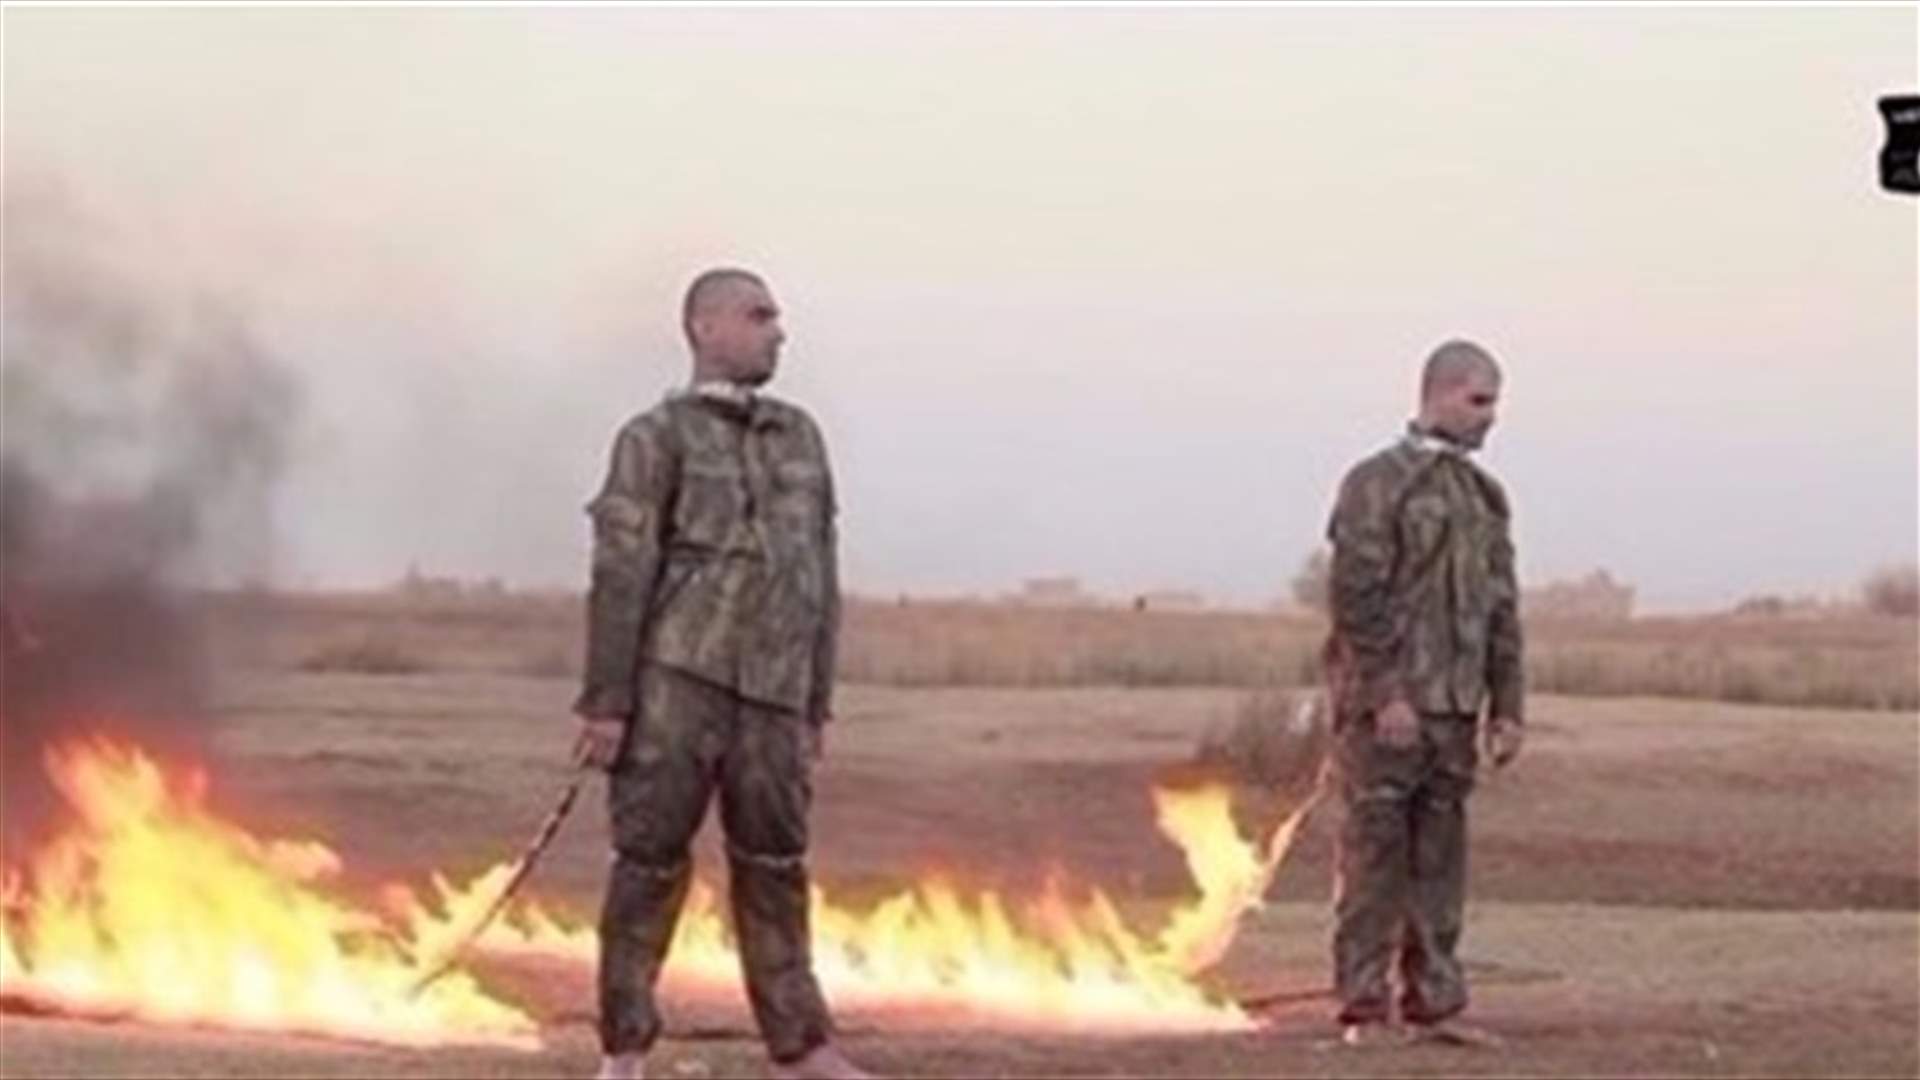 Monitoring group says Islamic State video shows 2 Turkish soldiers burned alive